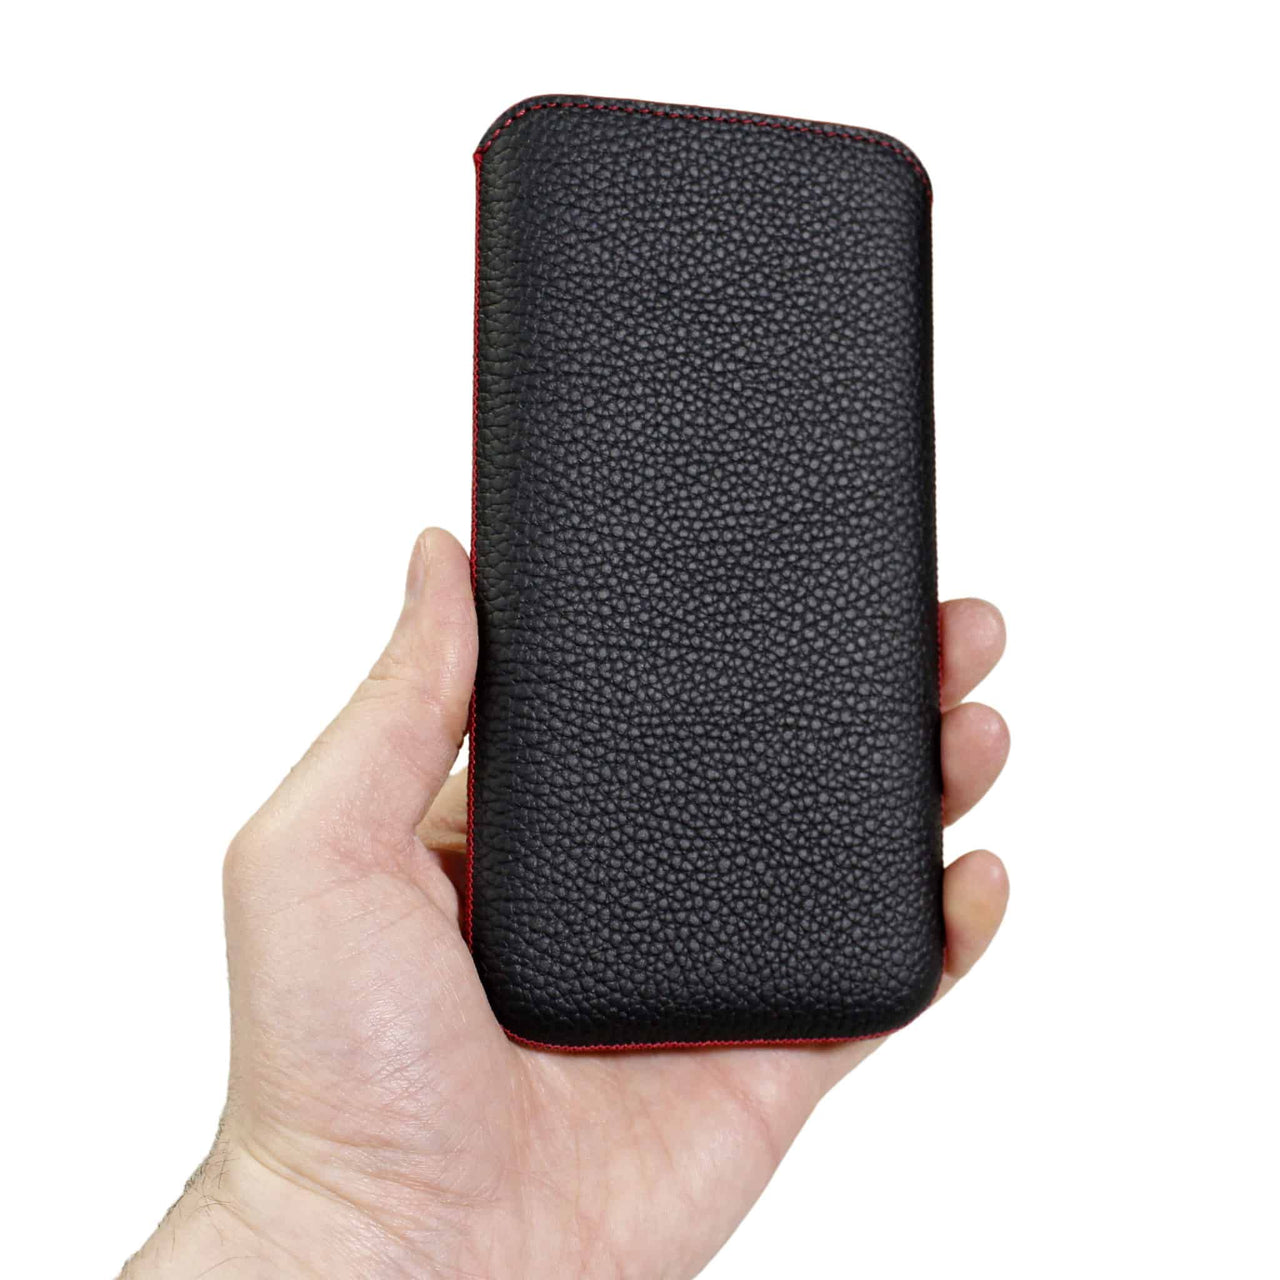 Samsung Galaxy S22 Plus Genuine Leather Pouch Sleeve Case | Artisanpouch